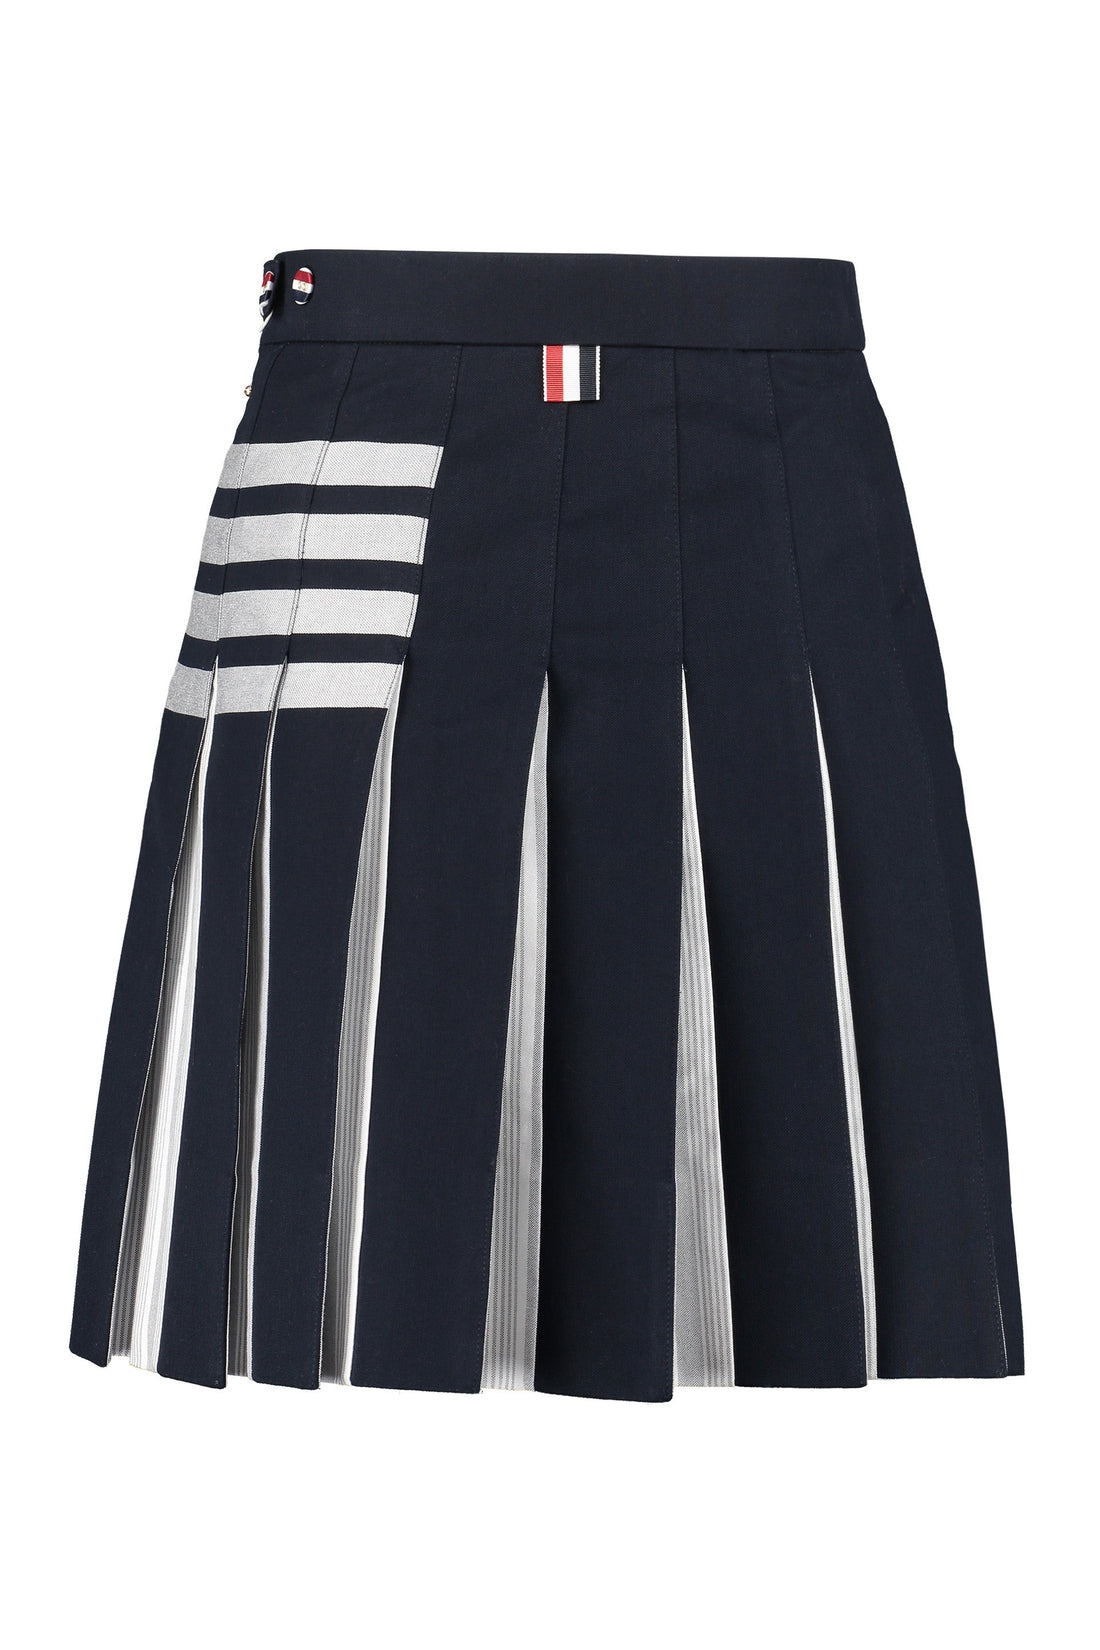 Thom Browne-OUTLET-SALE-Pleated cotton skirt-ARCHIVIST